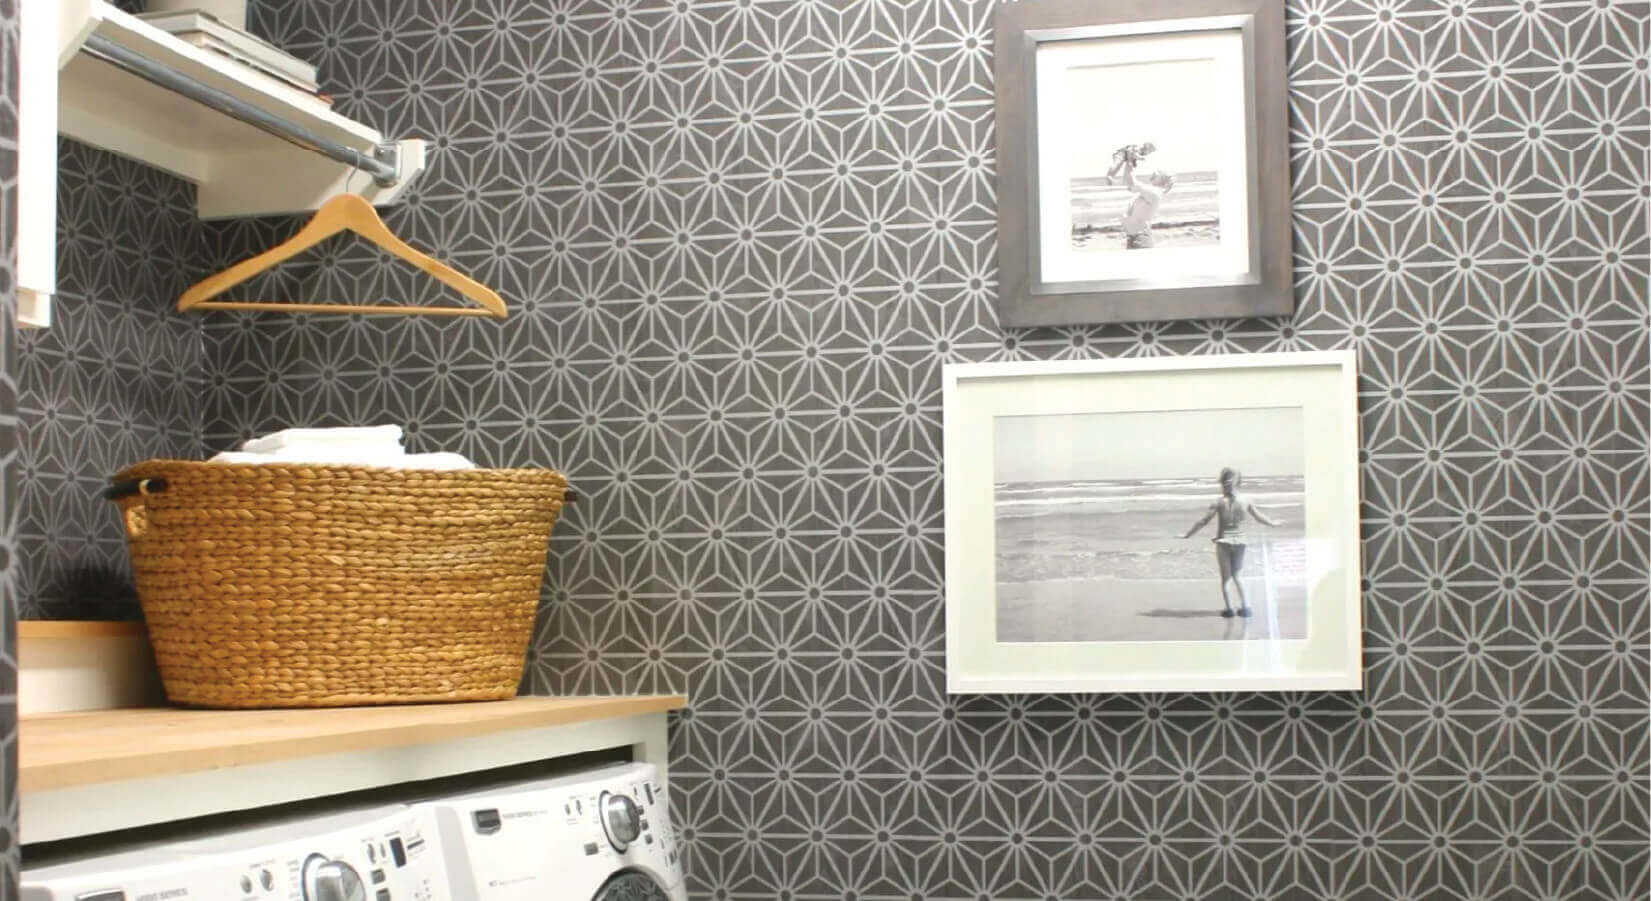 Laundry room with folding table on top of appliances, gray patterned wallpaper, and family photos.